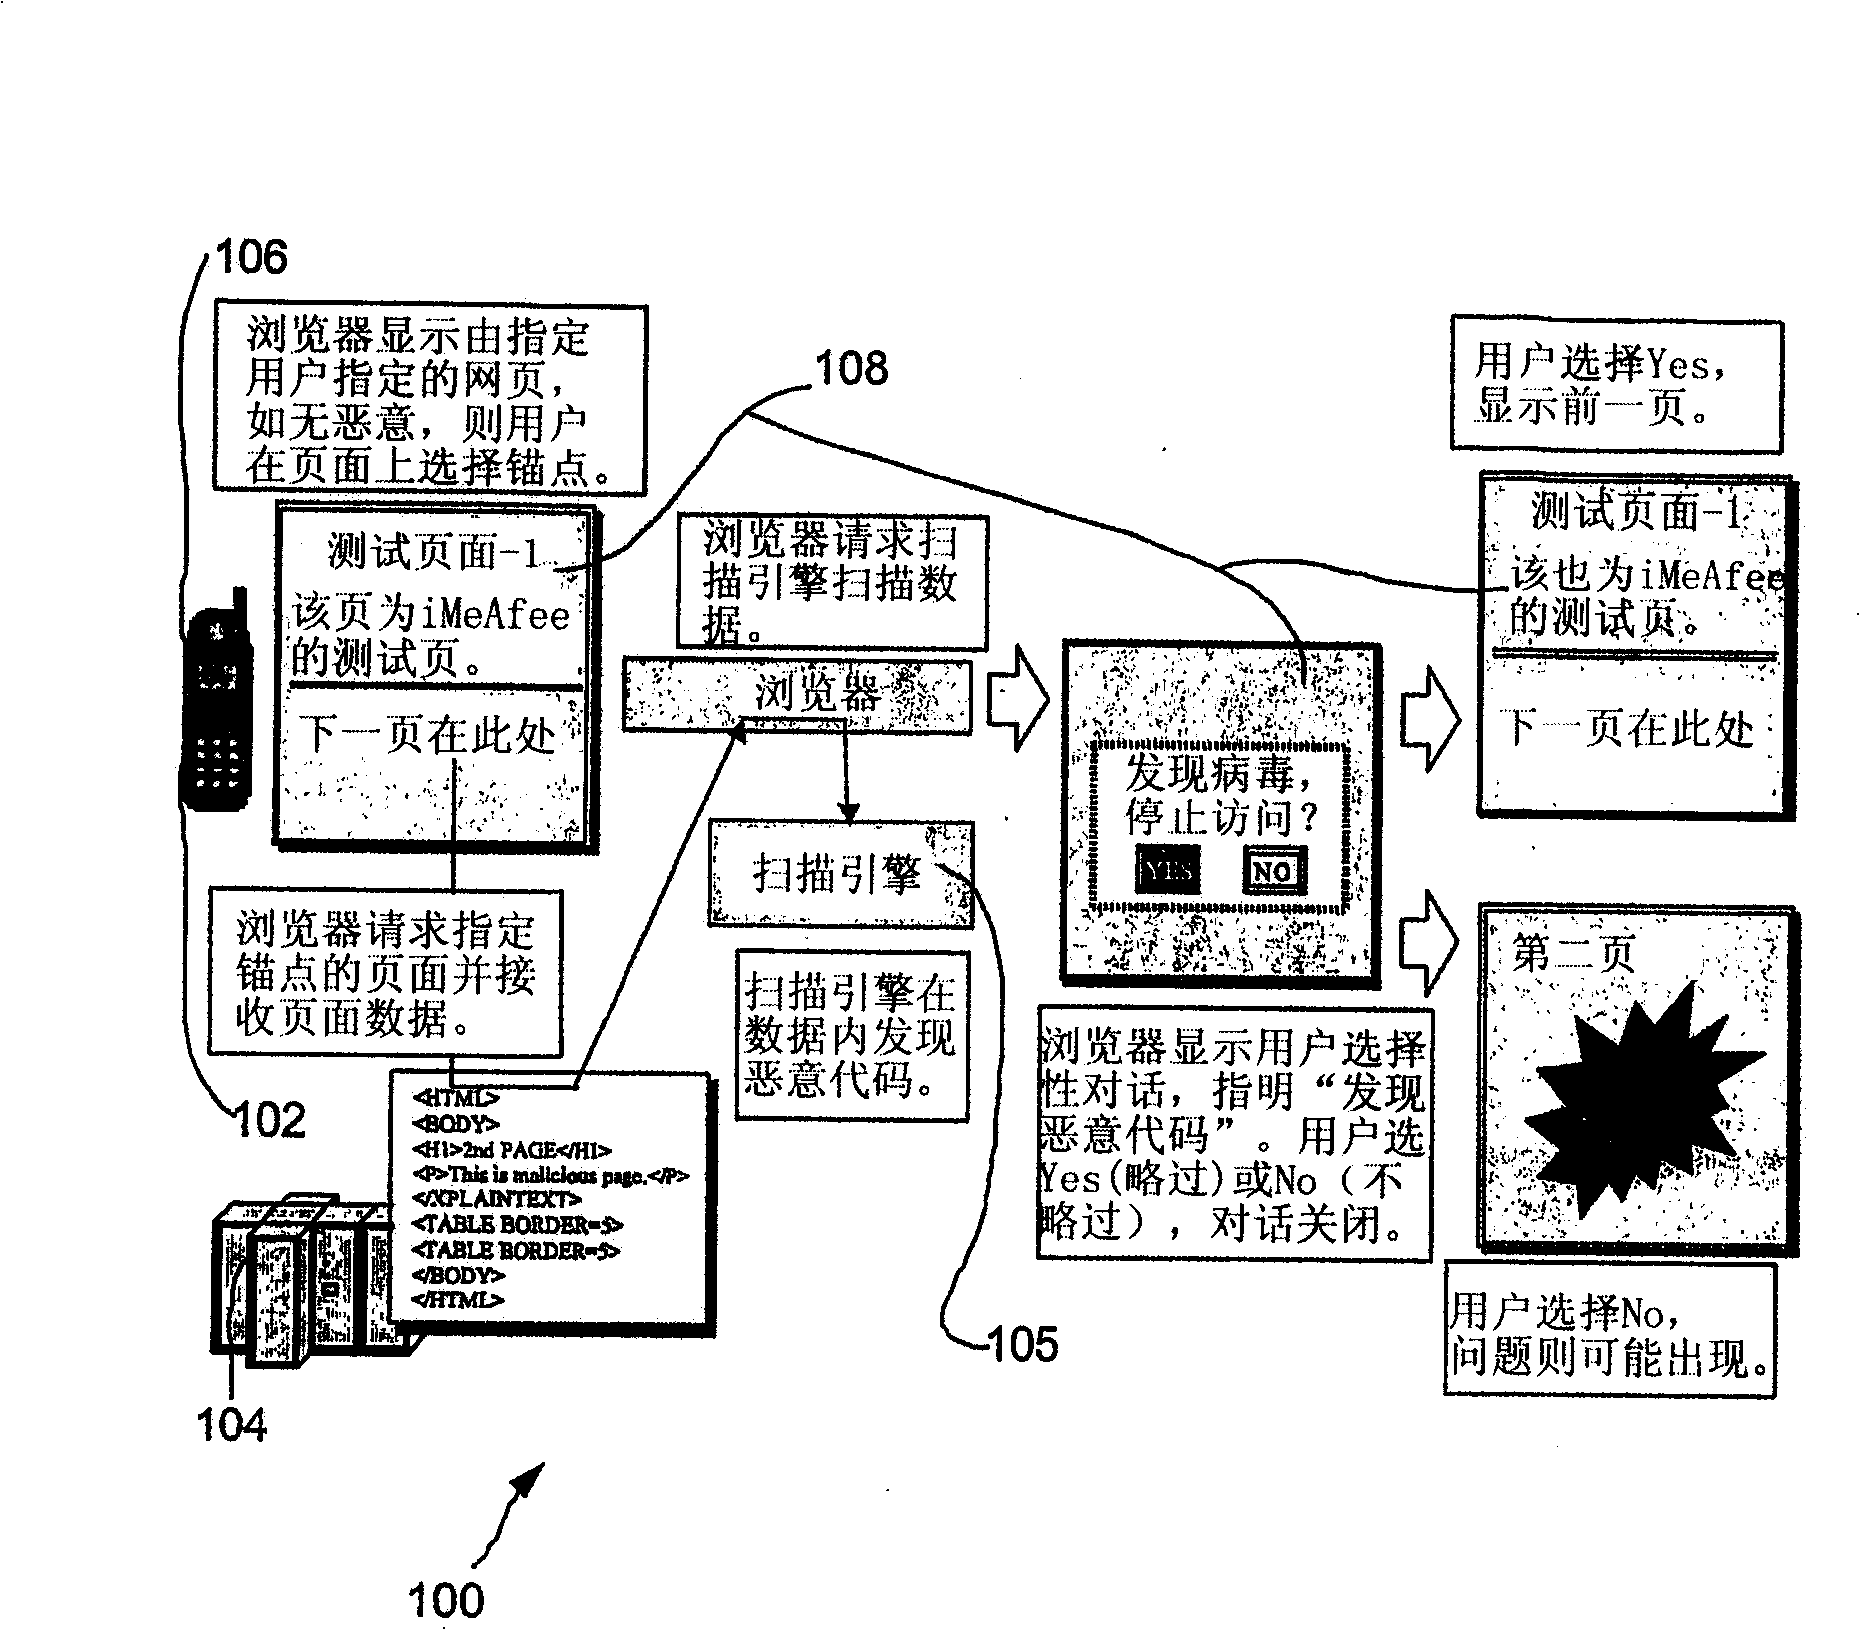 System, method and computer program product for content/context sensitive scanning utilizing a mobile communication device